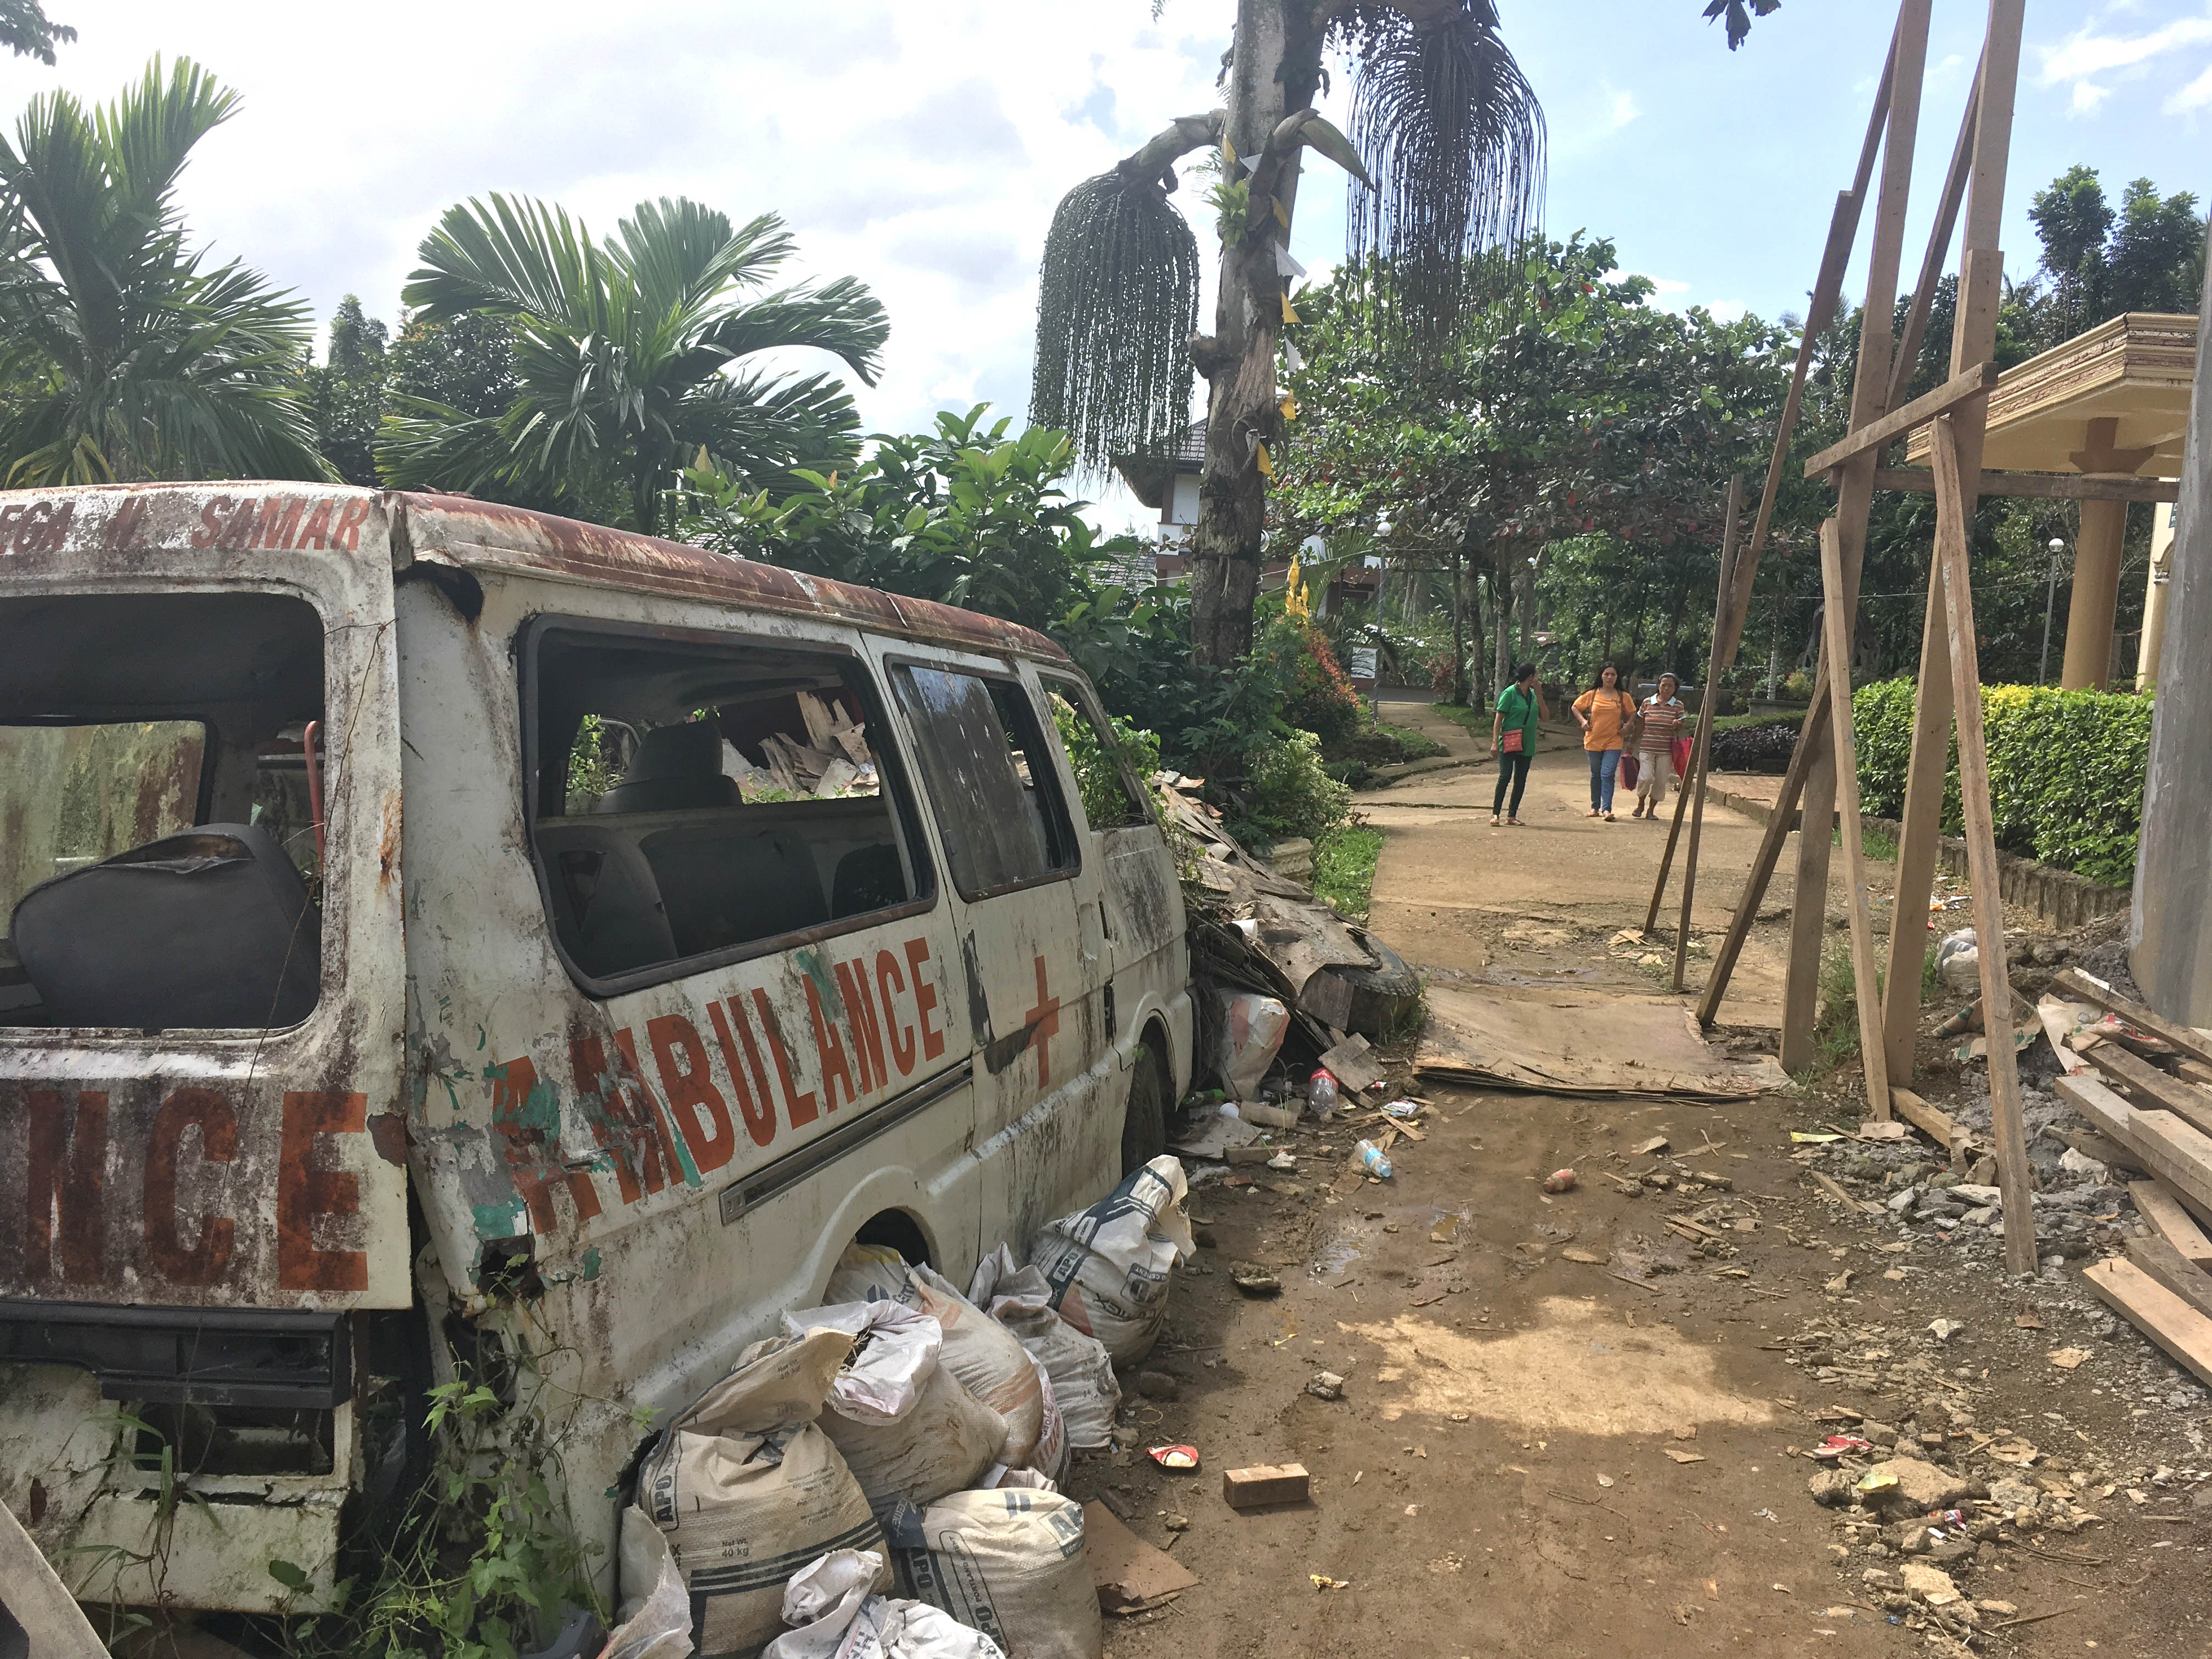 A dilapidated ambulance no longer in use